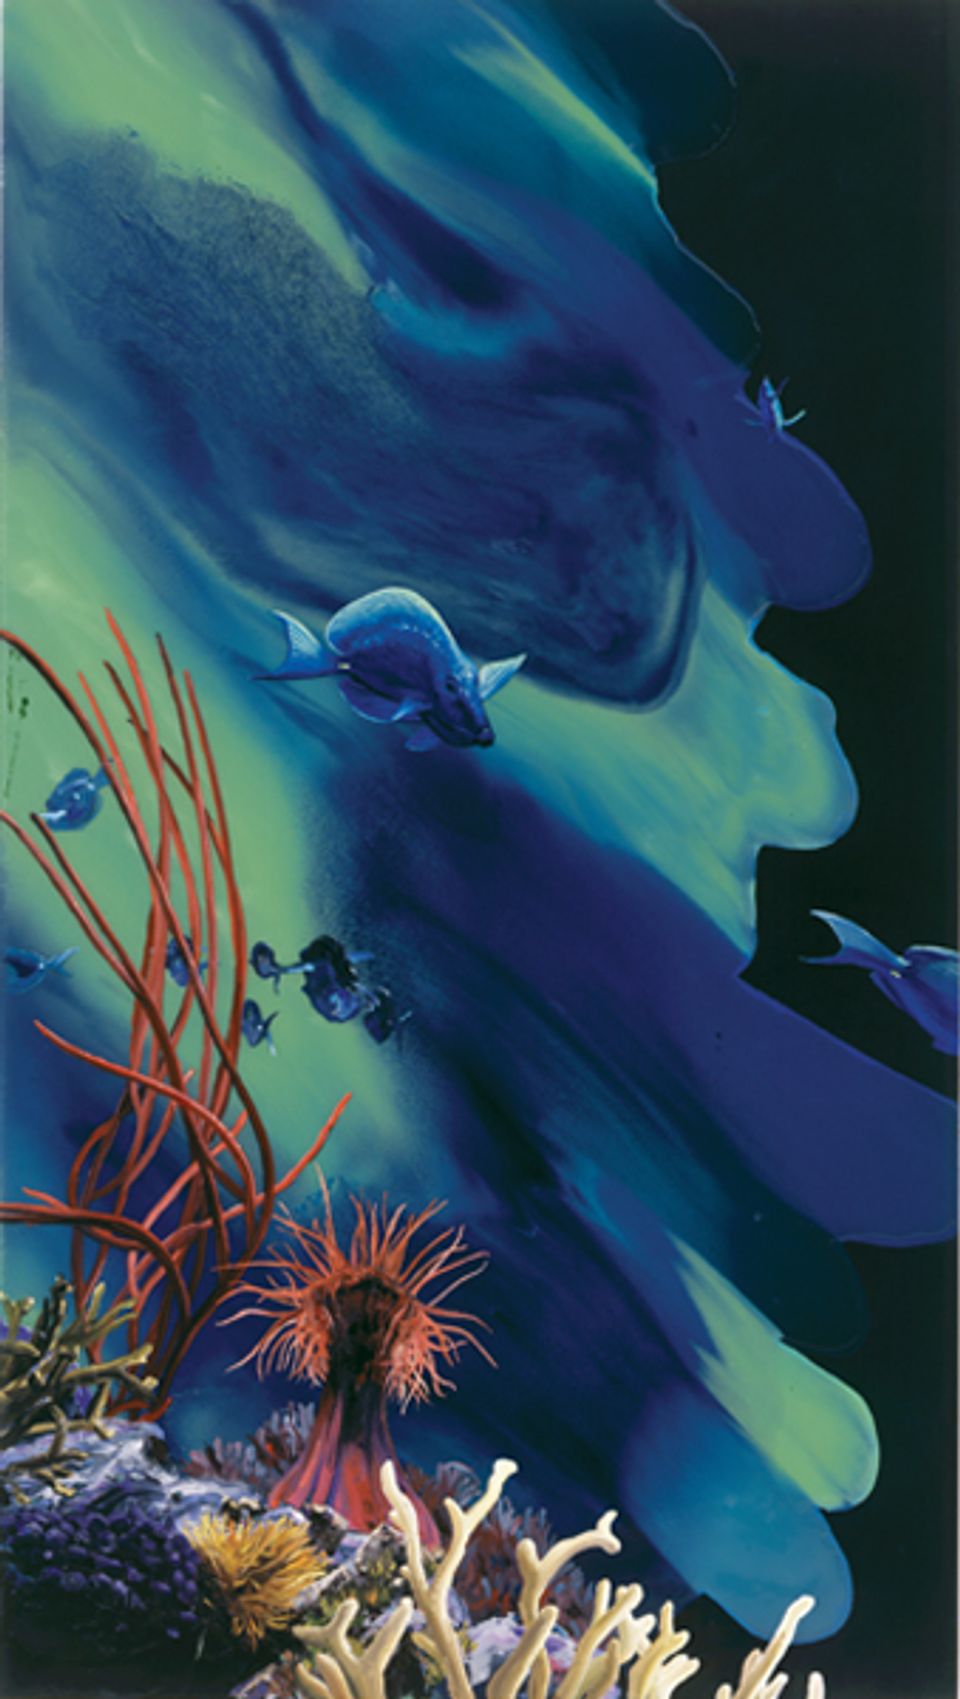 Rockman's oil painting of a coral reef.